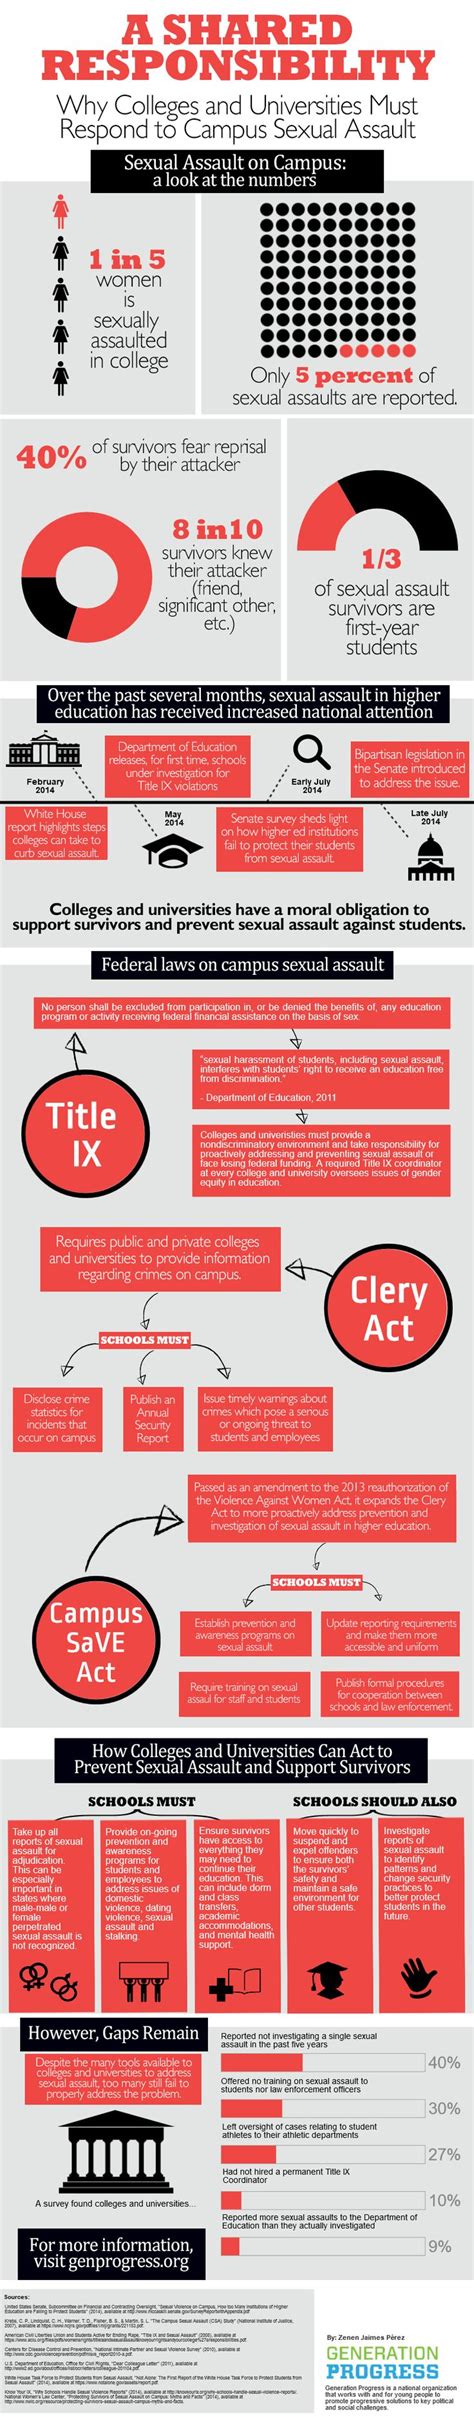 43 best images about sexual assault awareness on pinterest college campus culture and infographic